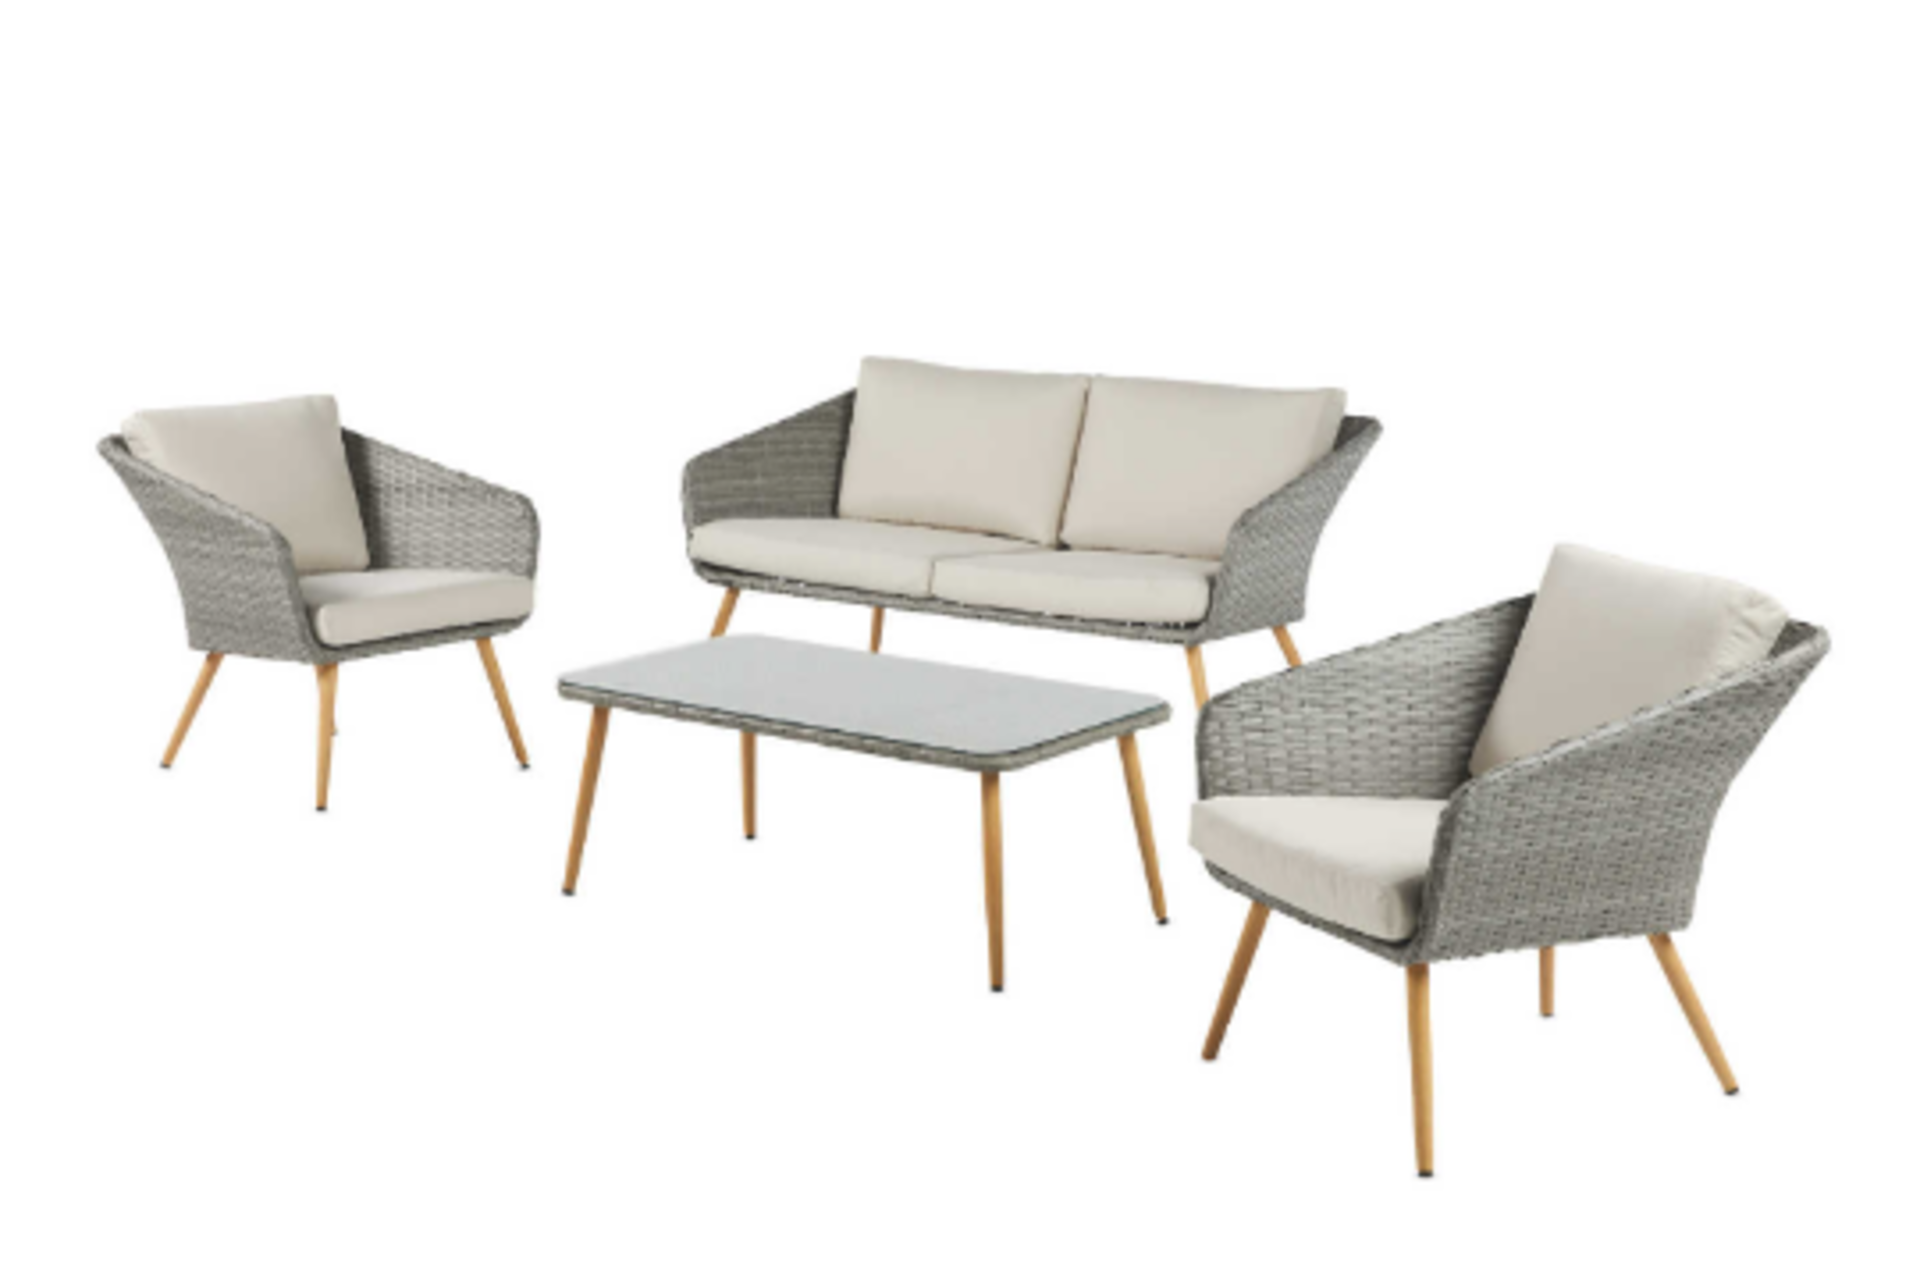 Luxury Rattan Coffee Set. Enjoy those lazy days in the sun whilst relaxing on the Rattan Coffee Set. - Image 2 of 2